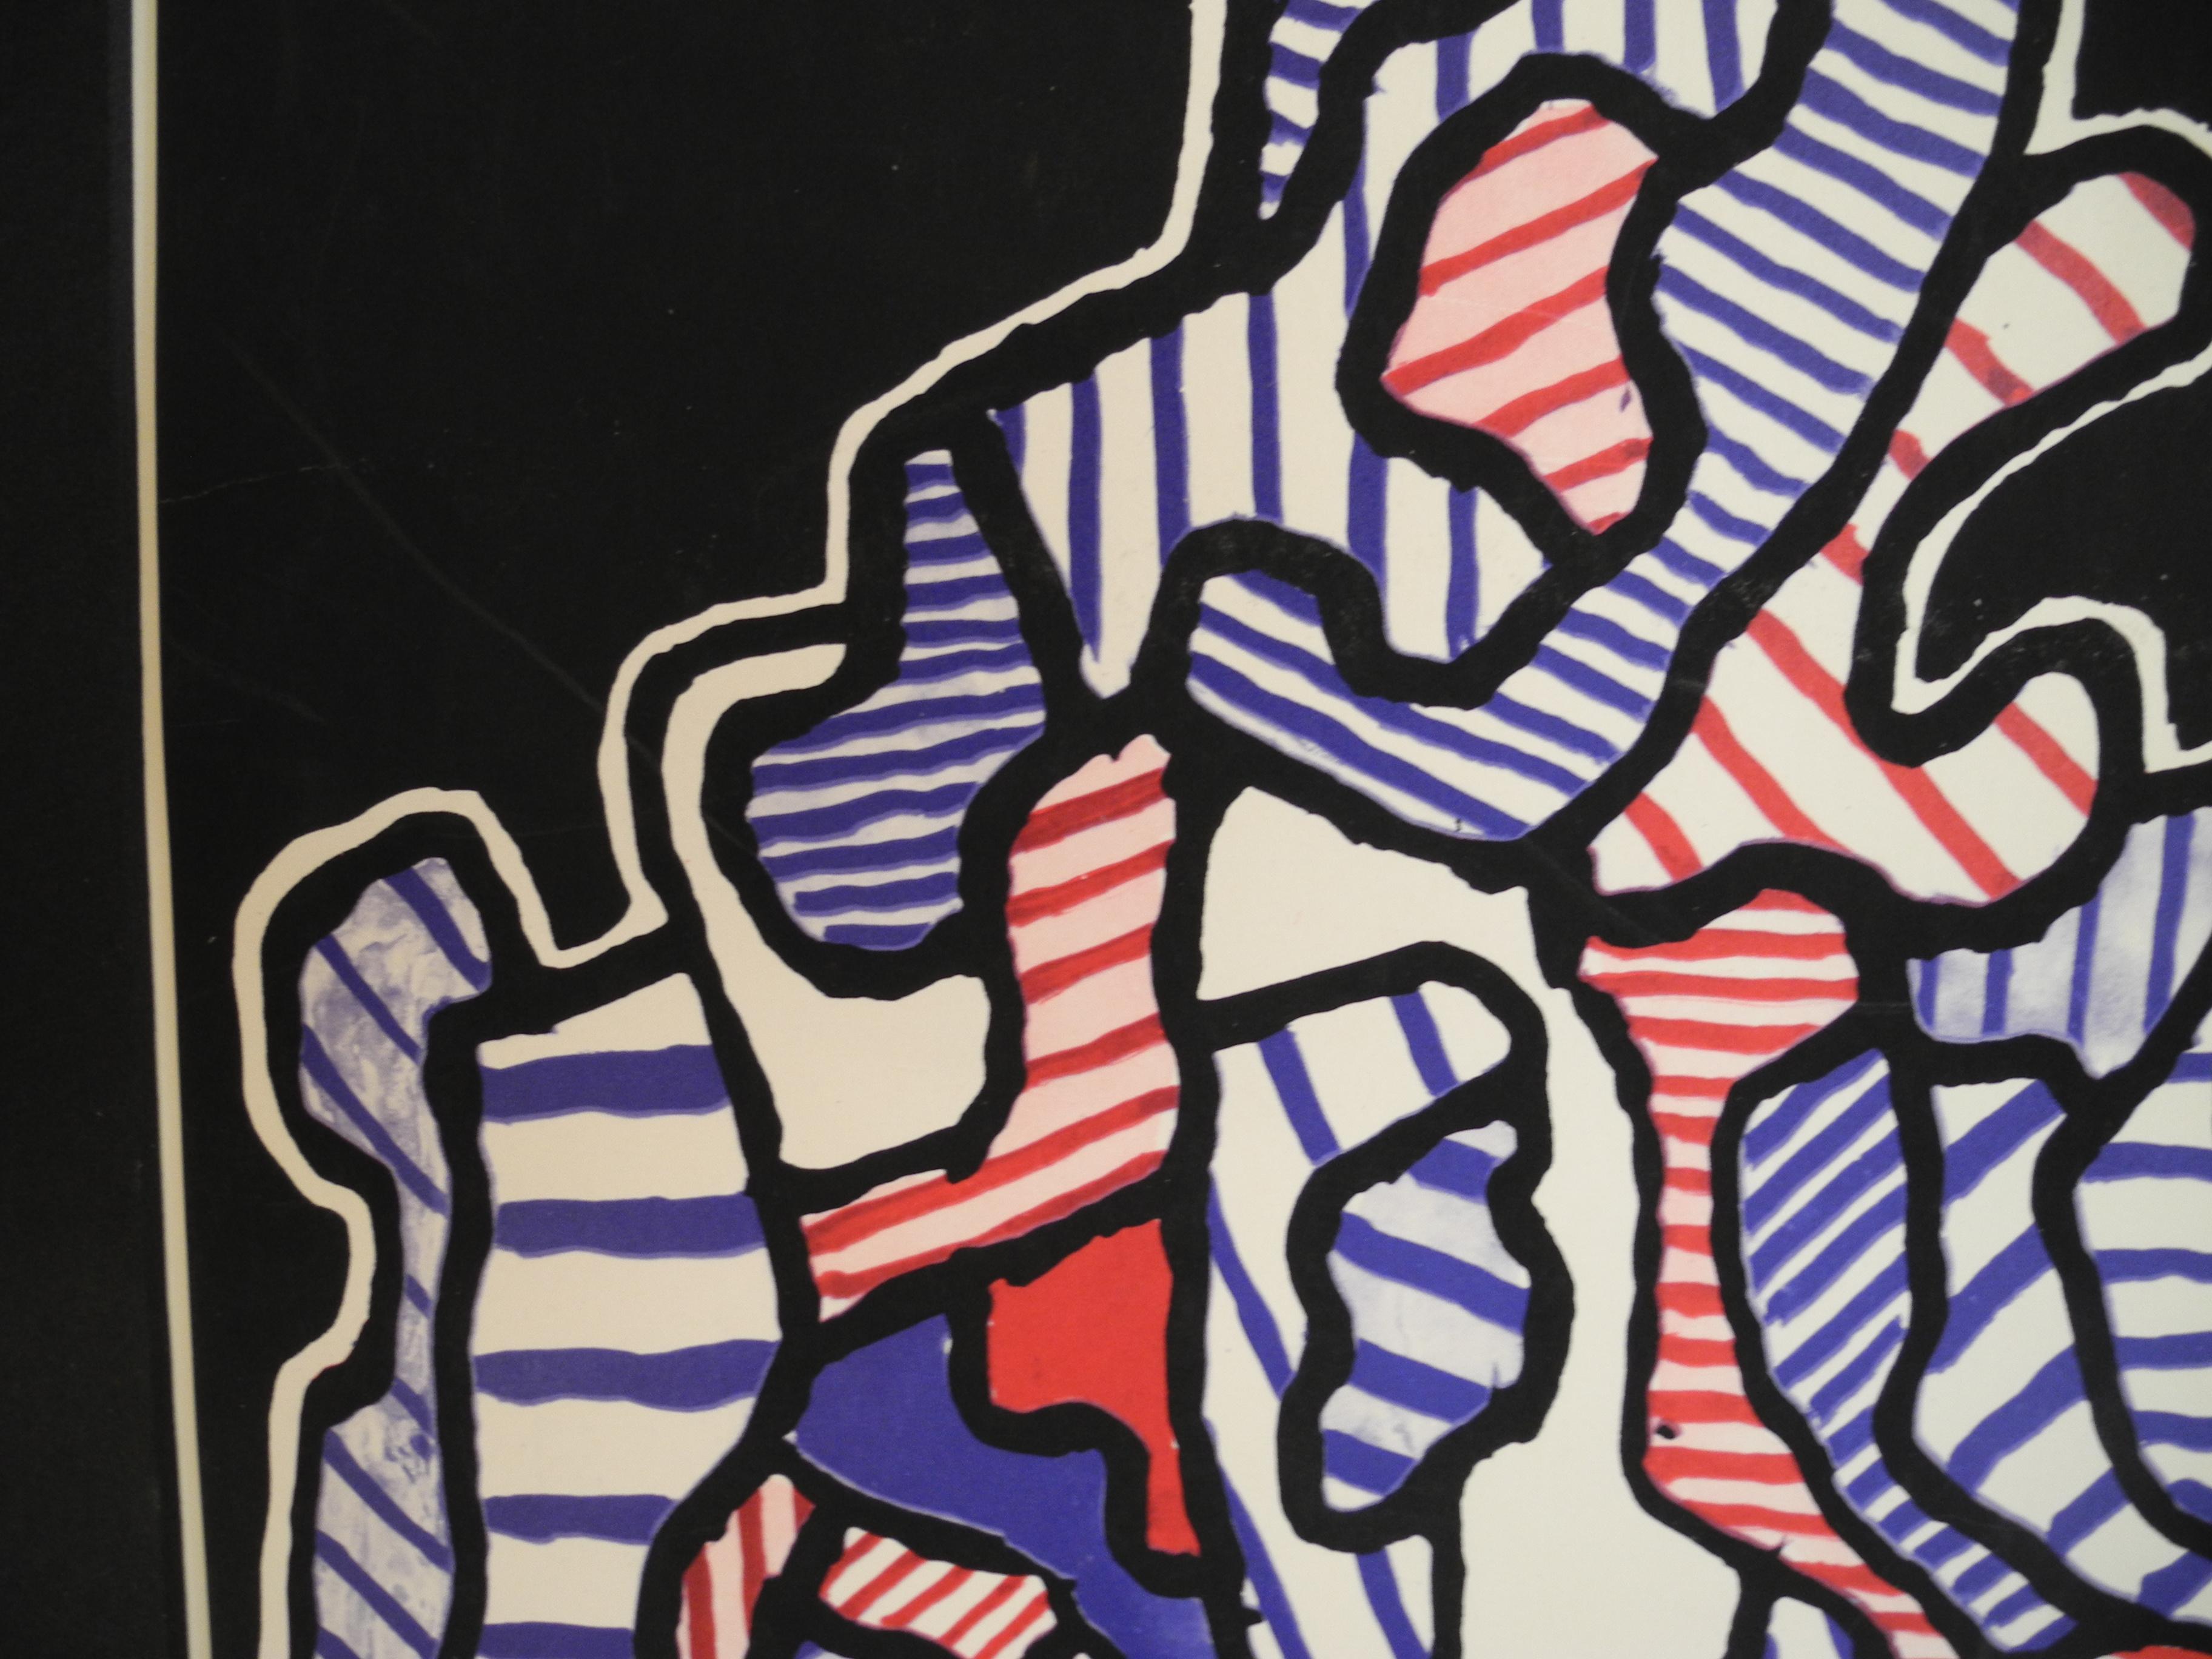 20th Century French Modern Art Original Serigraph by Jean Dubuffet, 1964